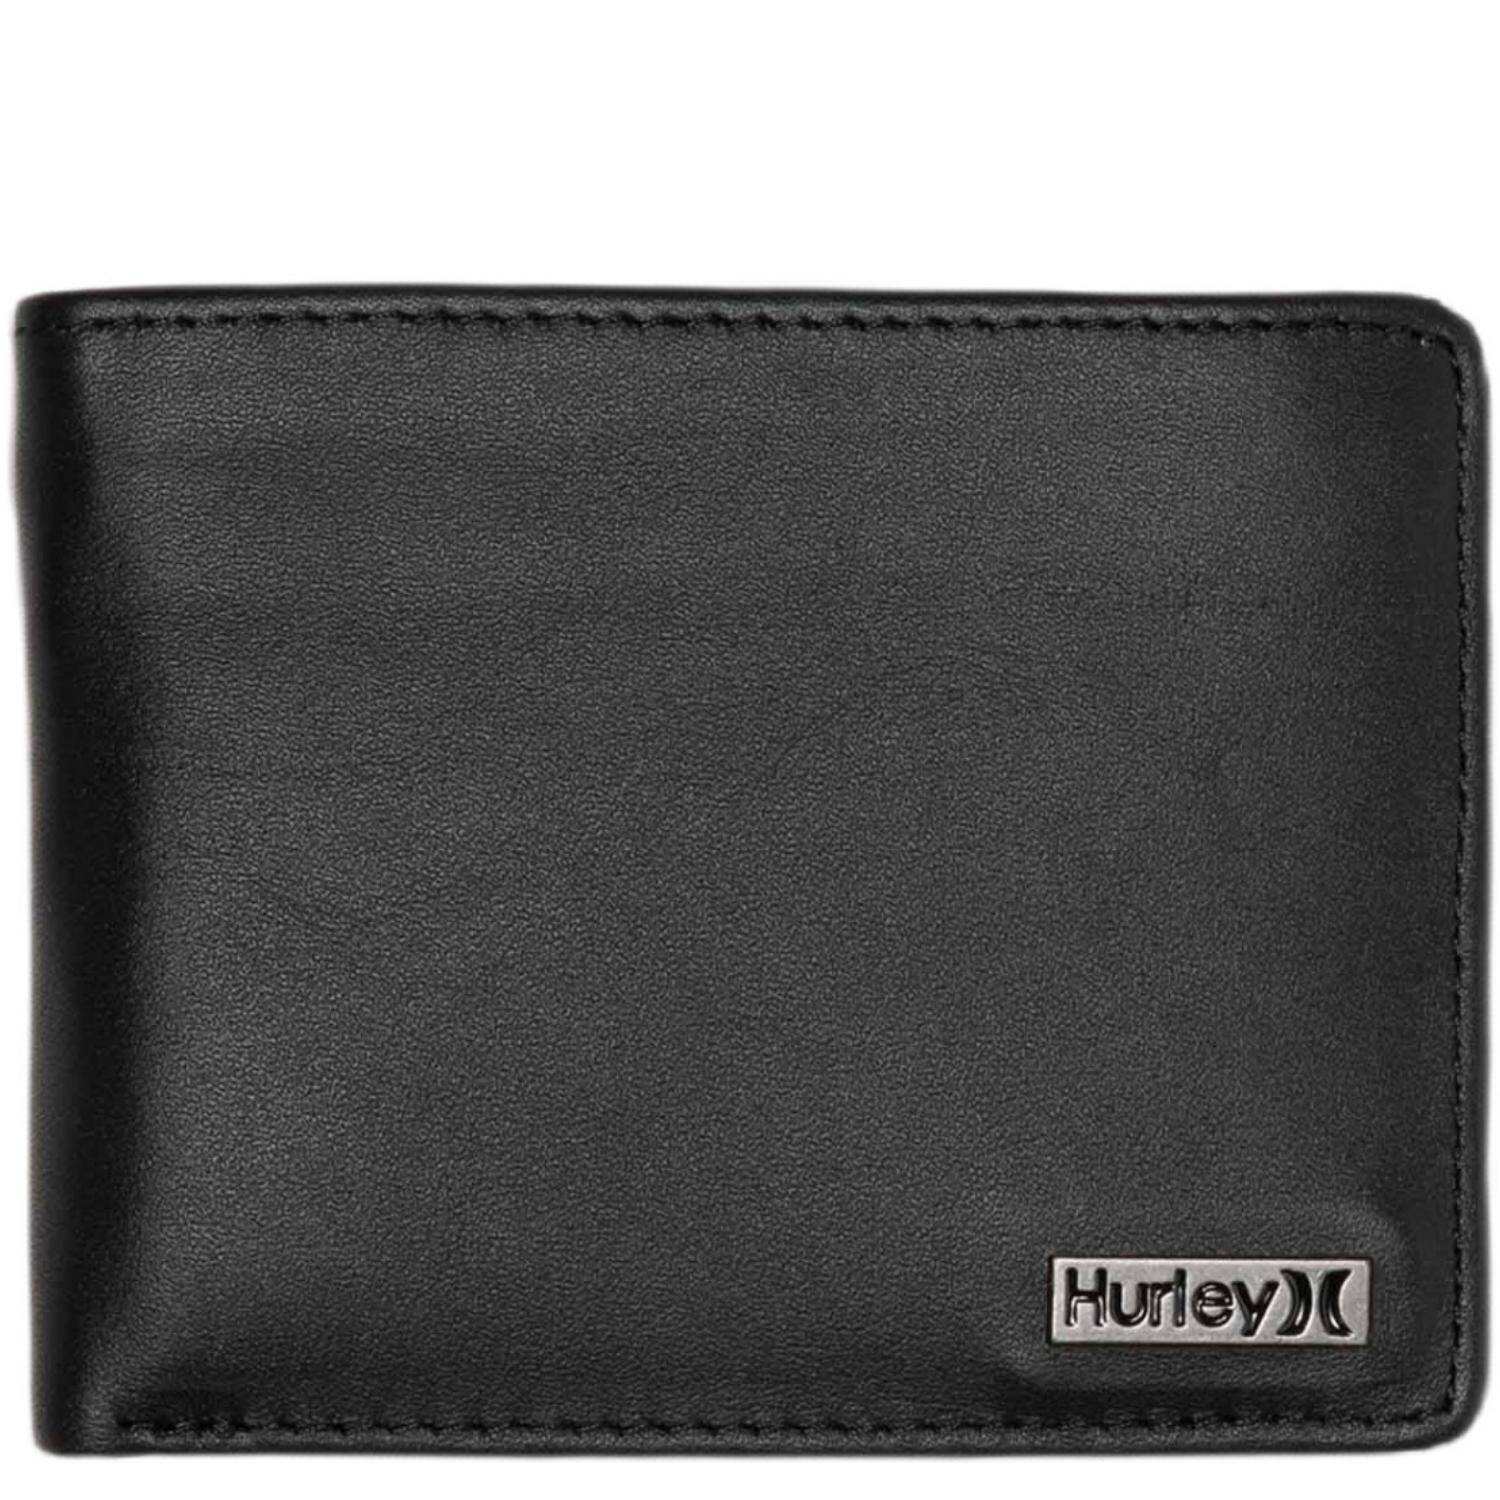 Hurley One And Only Leather Wallet - Black - Mens Wallet by Hurley